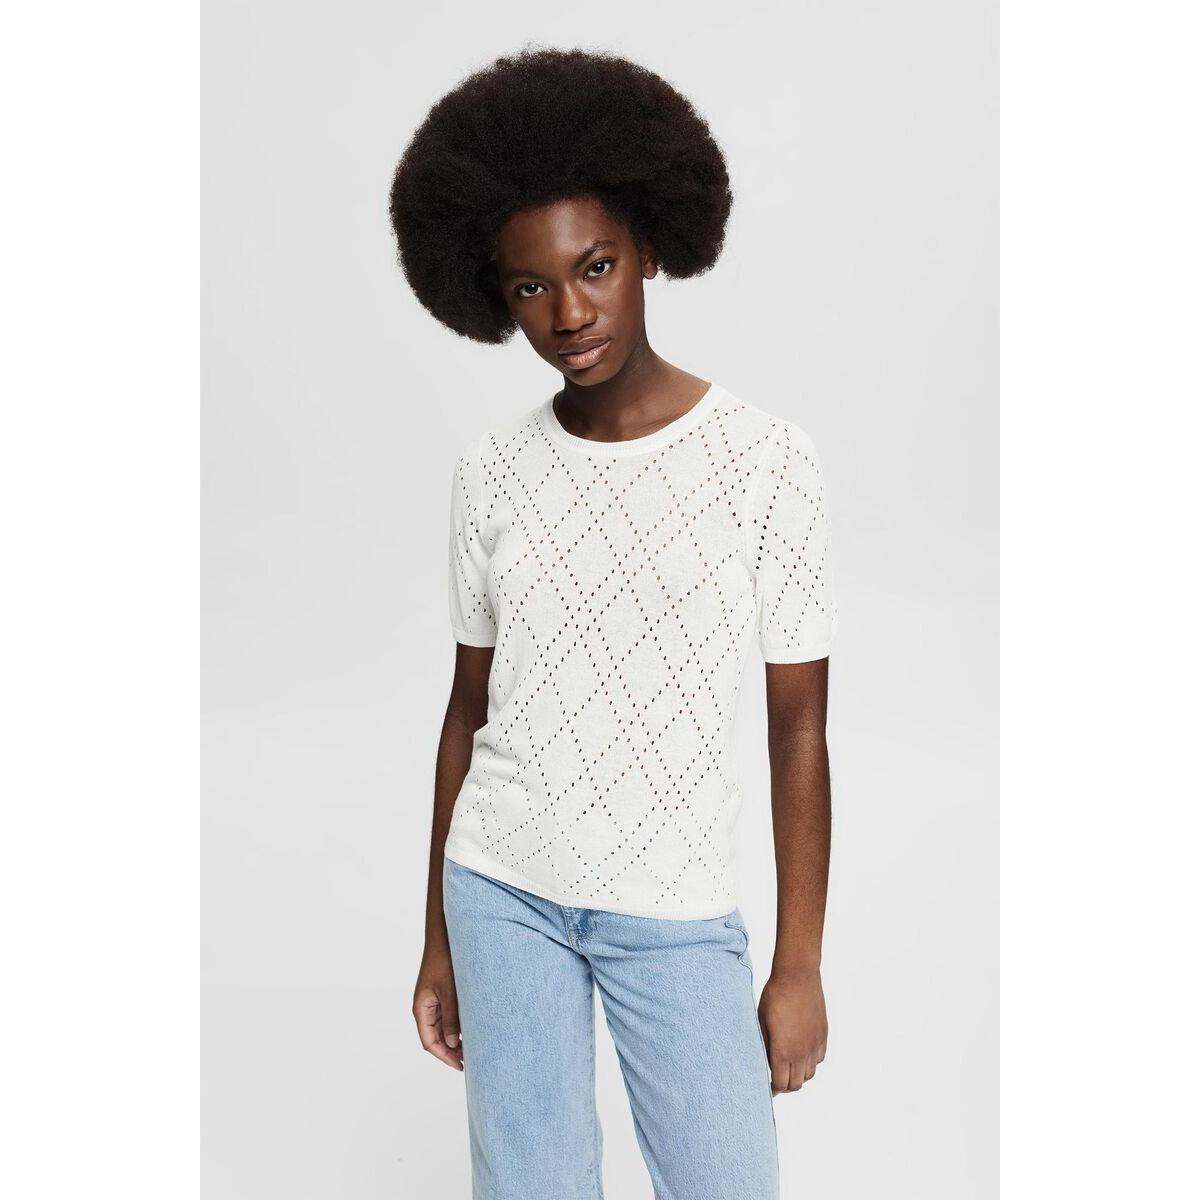 Esprit - Linen Blend Knitted Top in Off White-SQ6602491